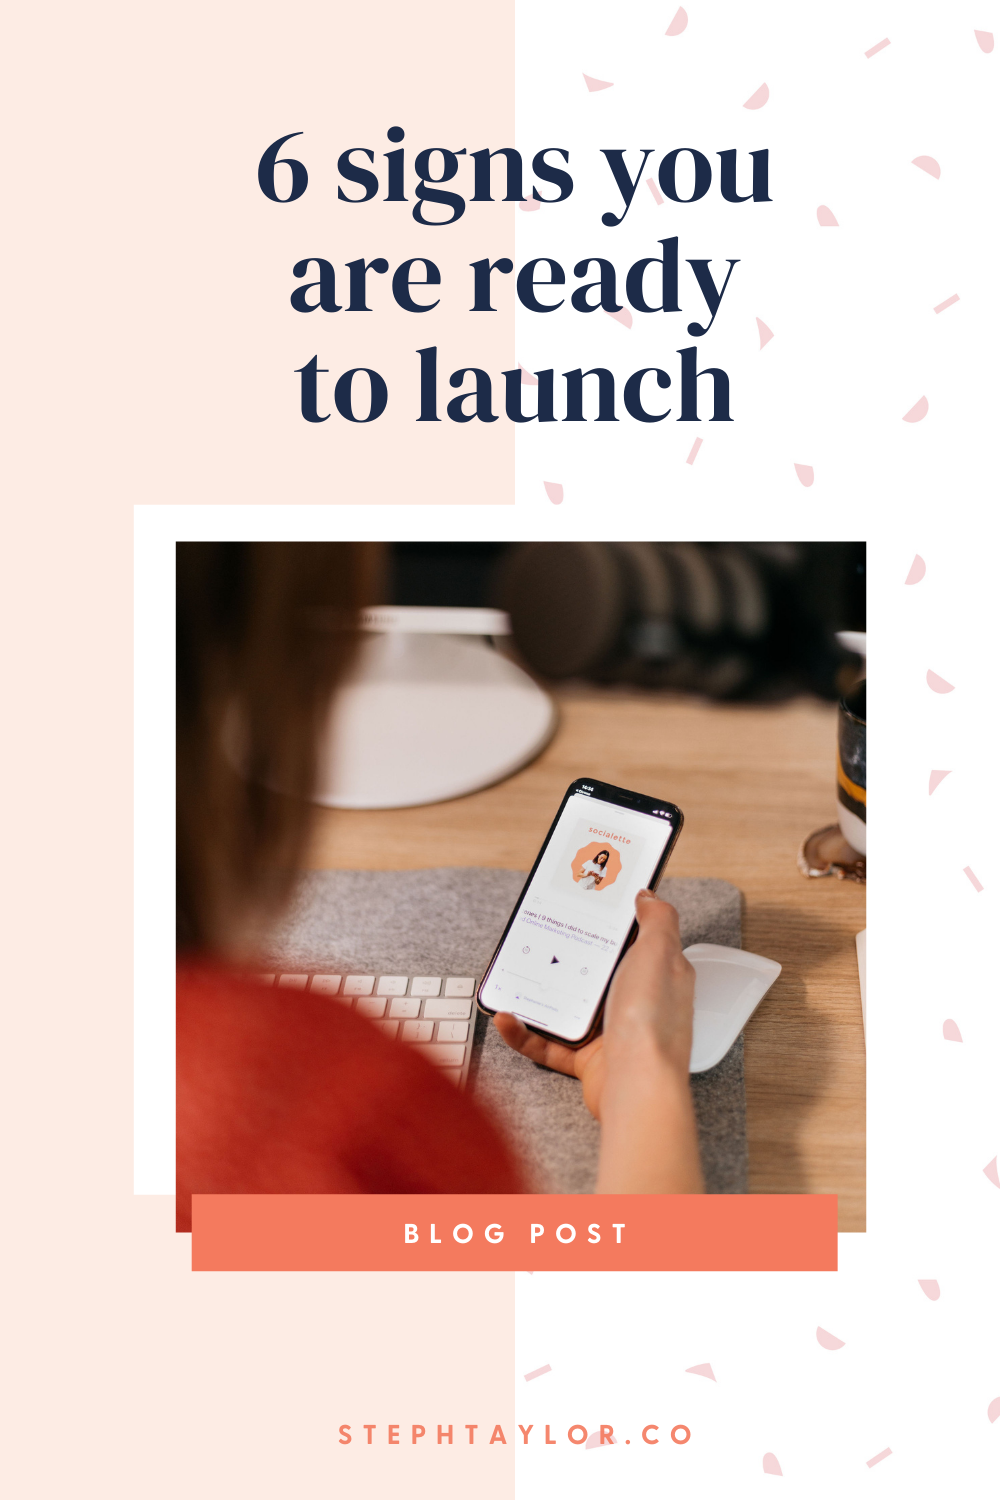 6 signs you are ready to launch